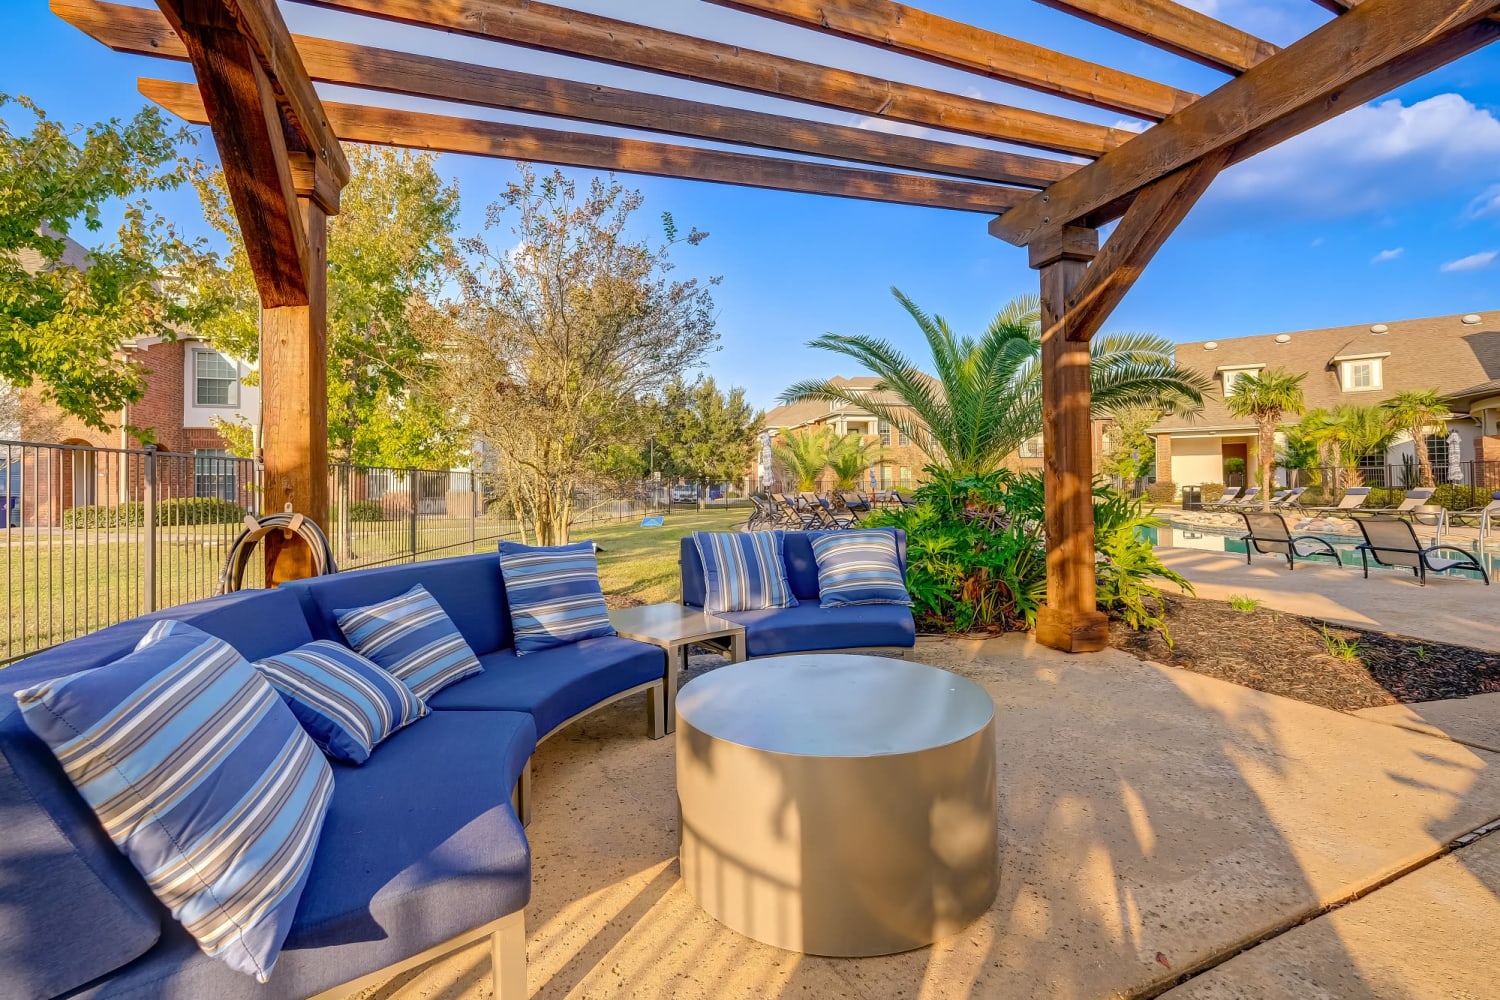 Comfortable outdoor seating with a fireplace under a gazebo at Chateau Mirage Apartment Homes in Lafayette, Louisiana